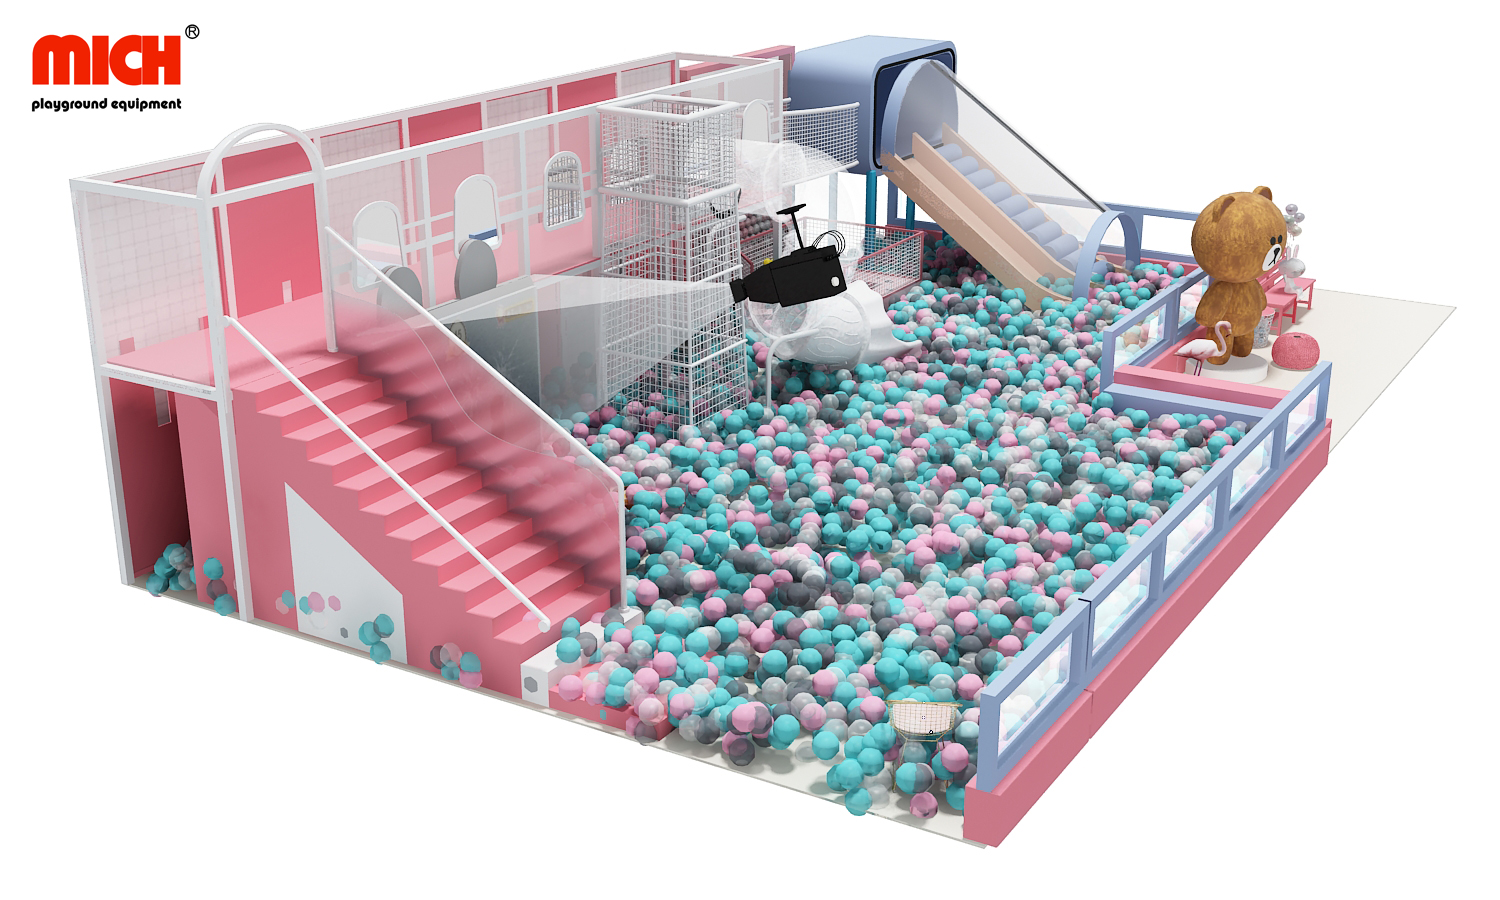 Mich Indoor Ball Pit House per Big Kids